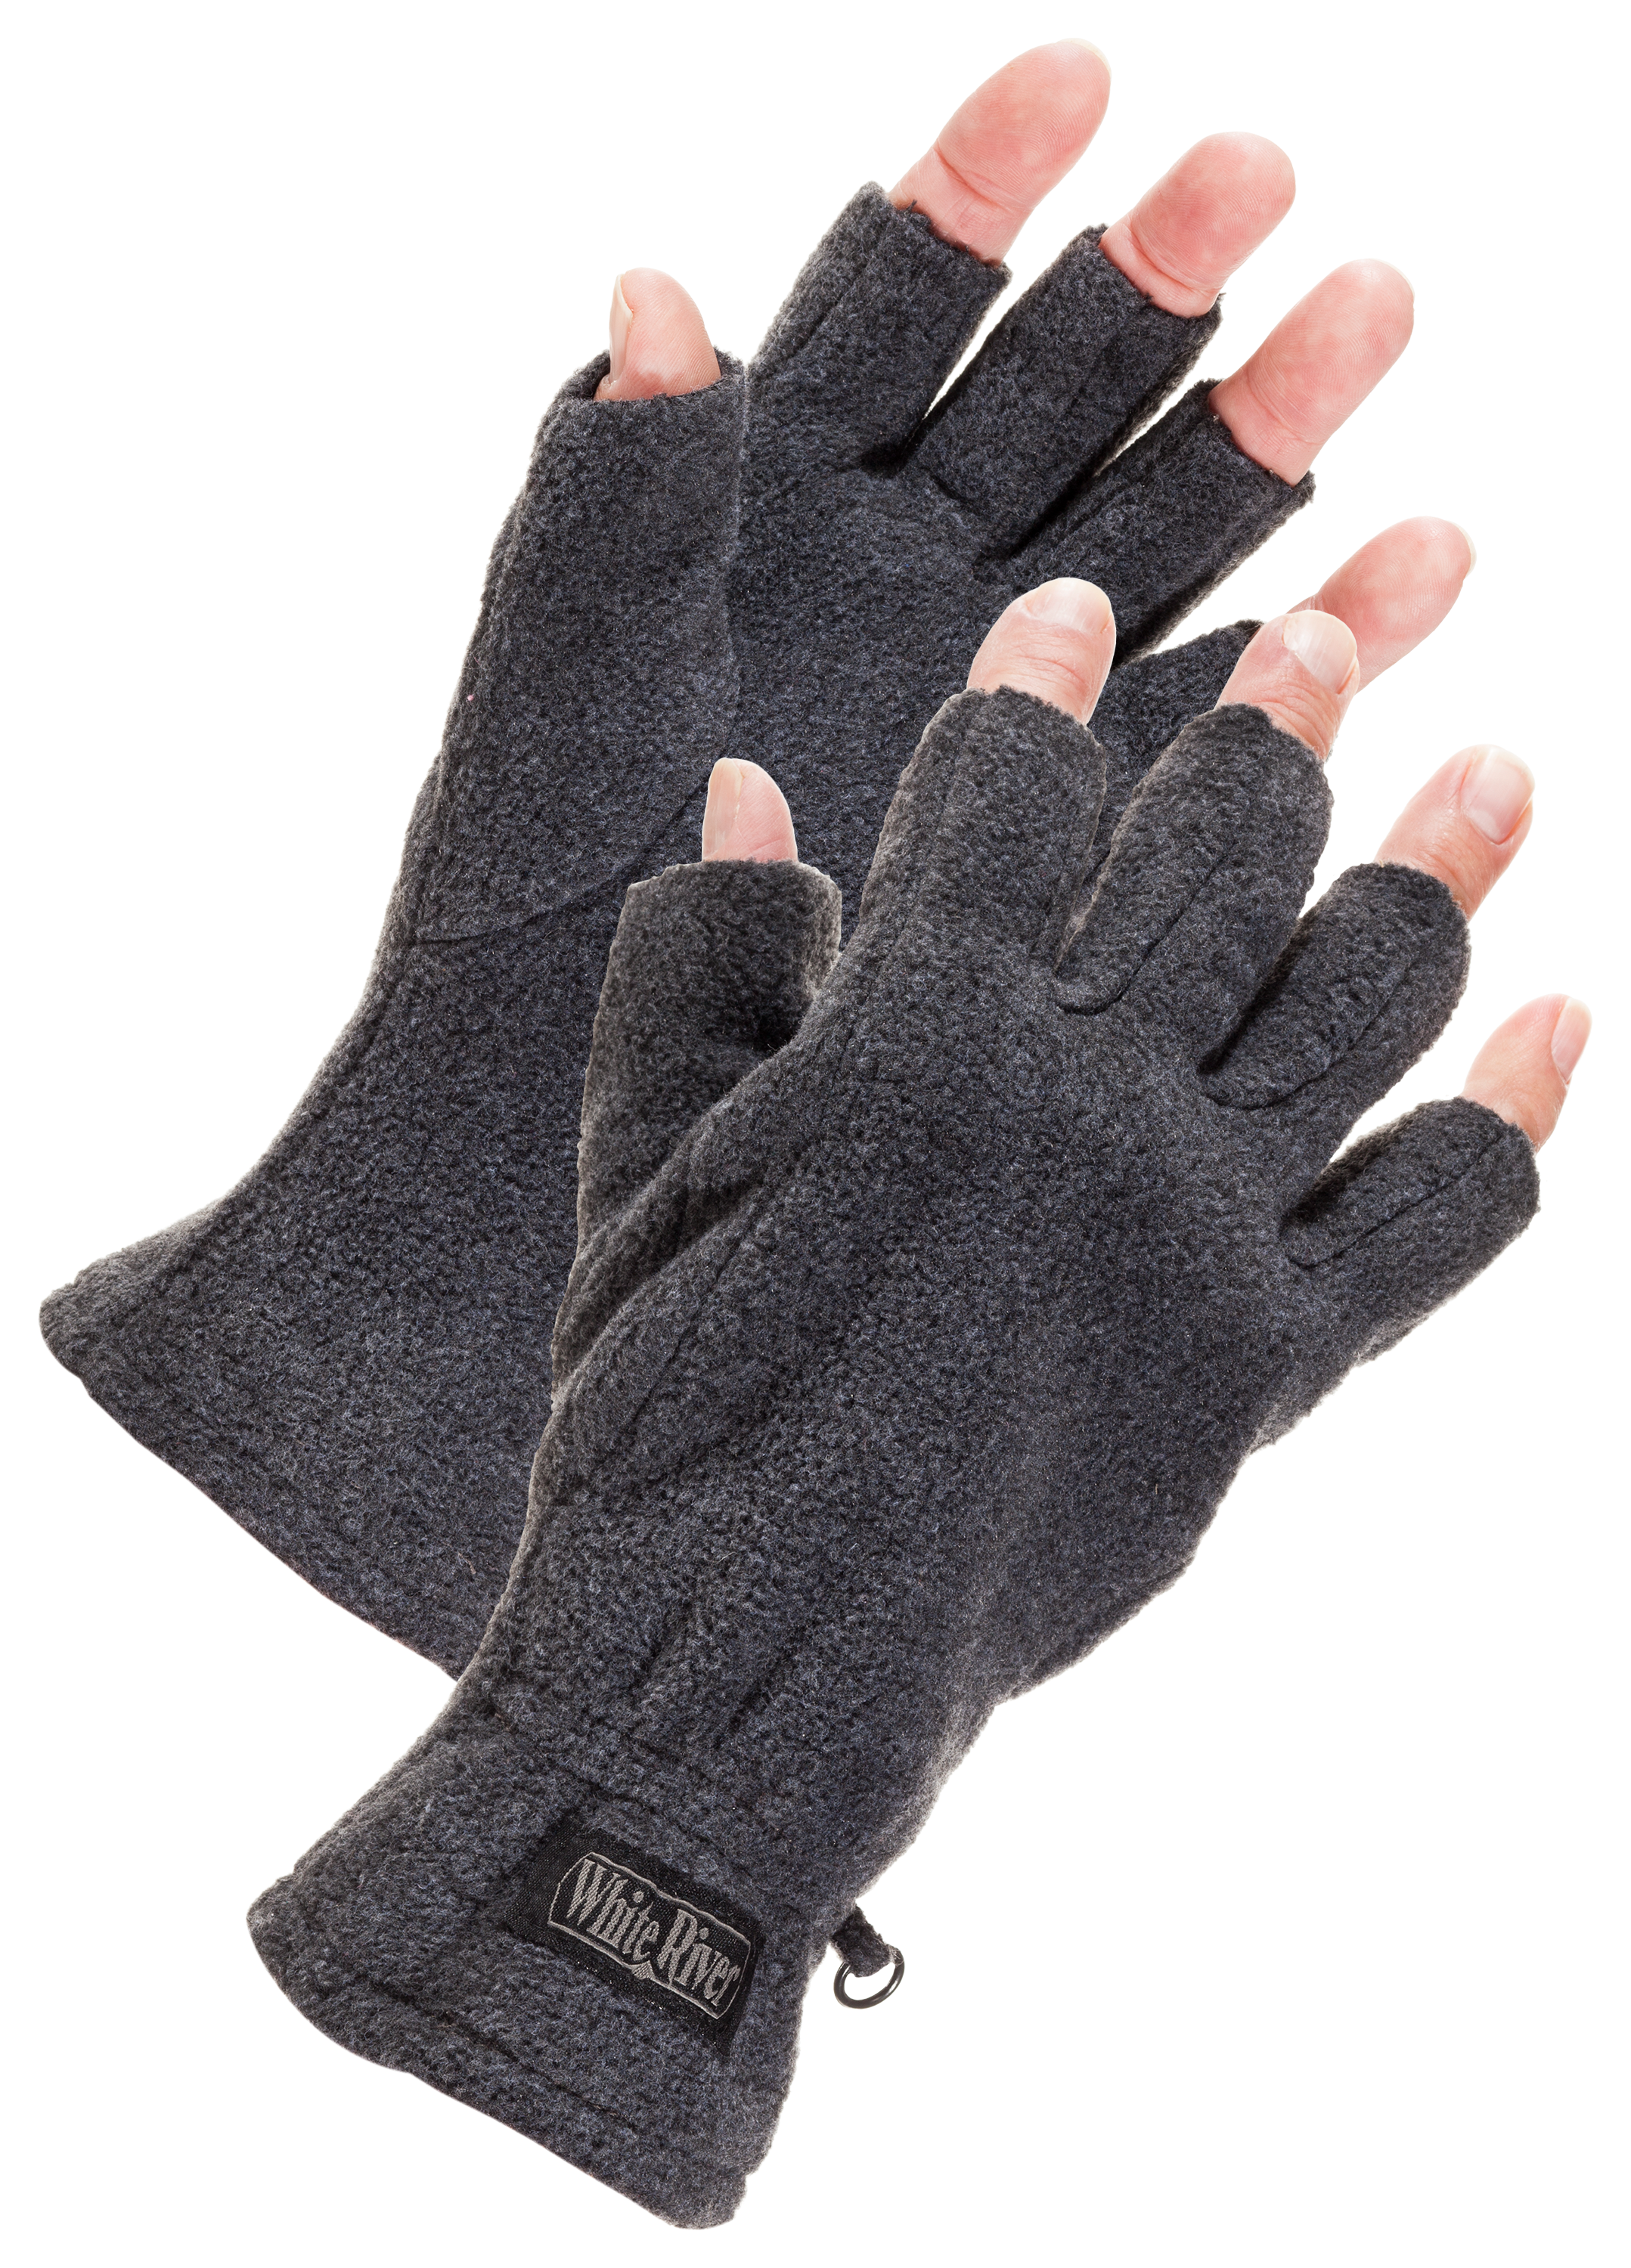 Fingerless Fishing Gloves for sale, Shop with Afterpay